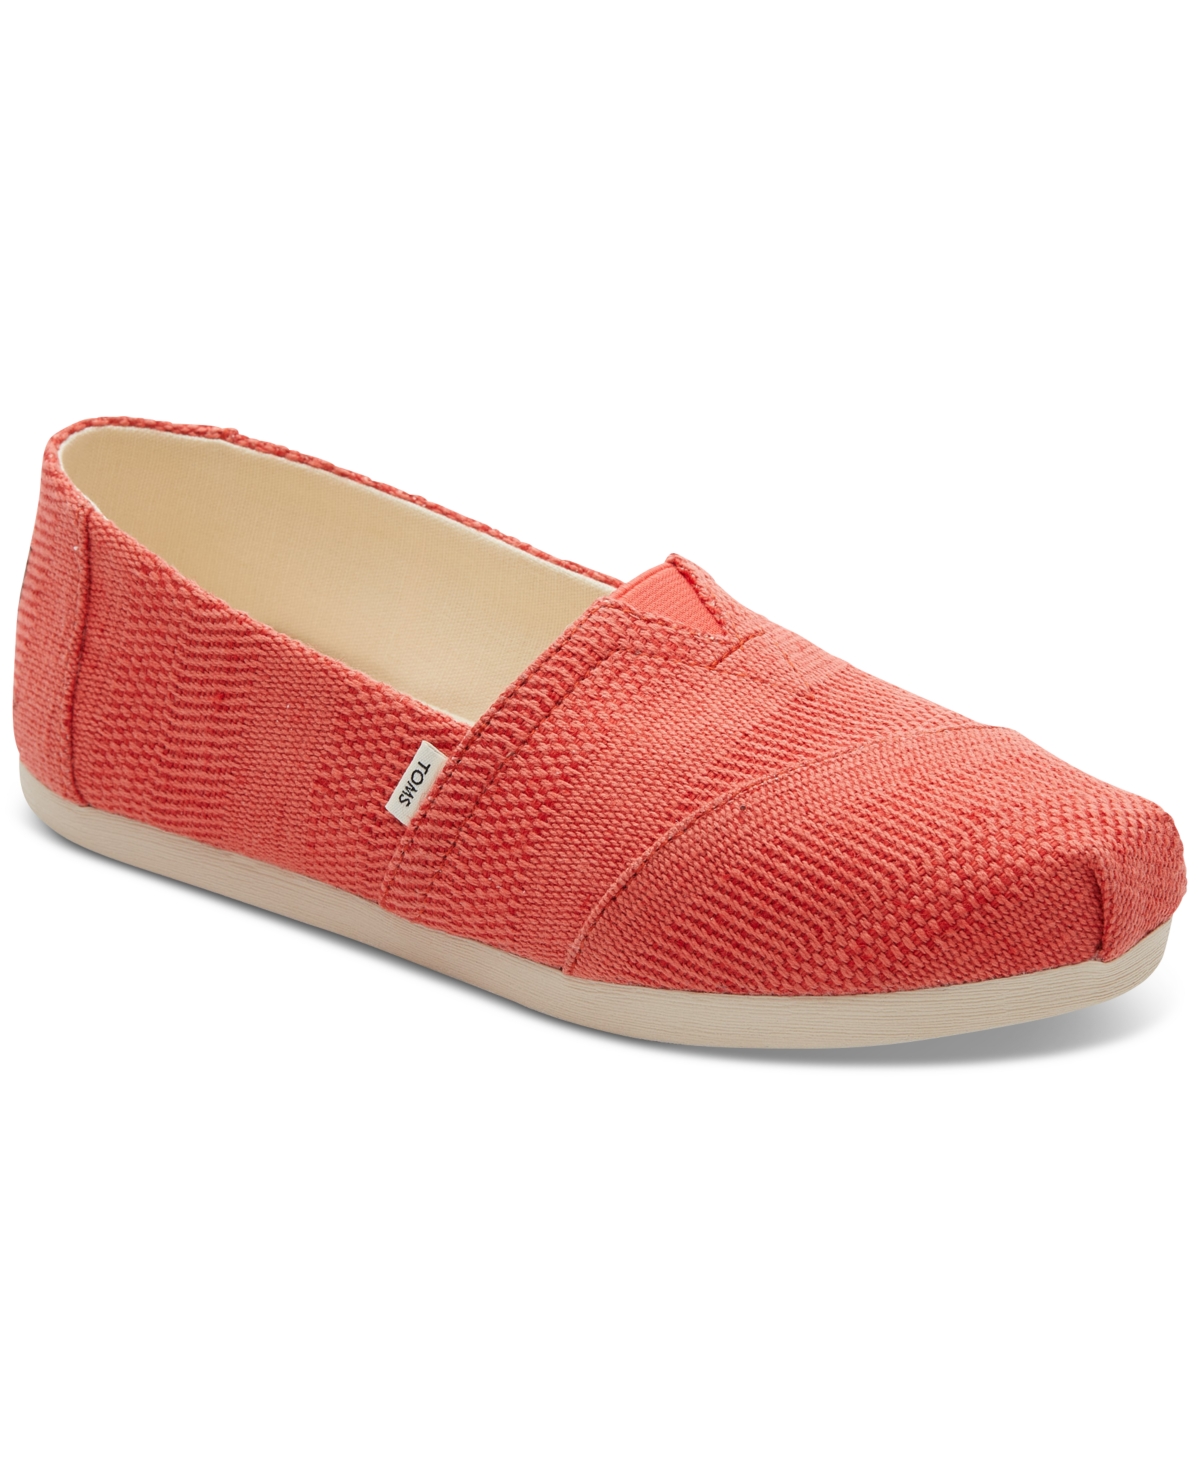 Toms Women's Alpargata Cloudbound Recycled Slip-on Flats Women's Shoes ...